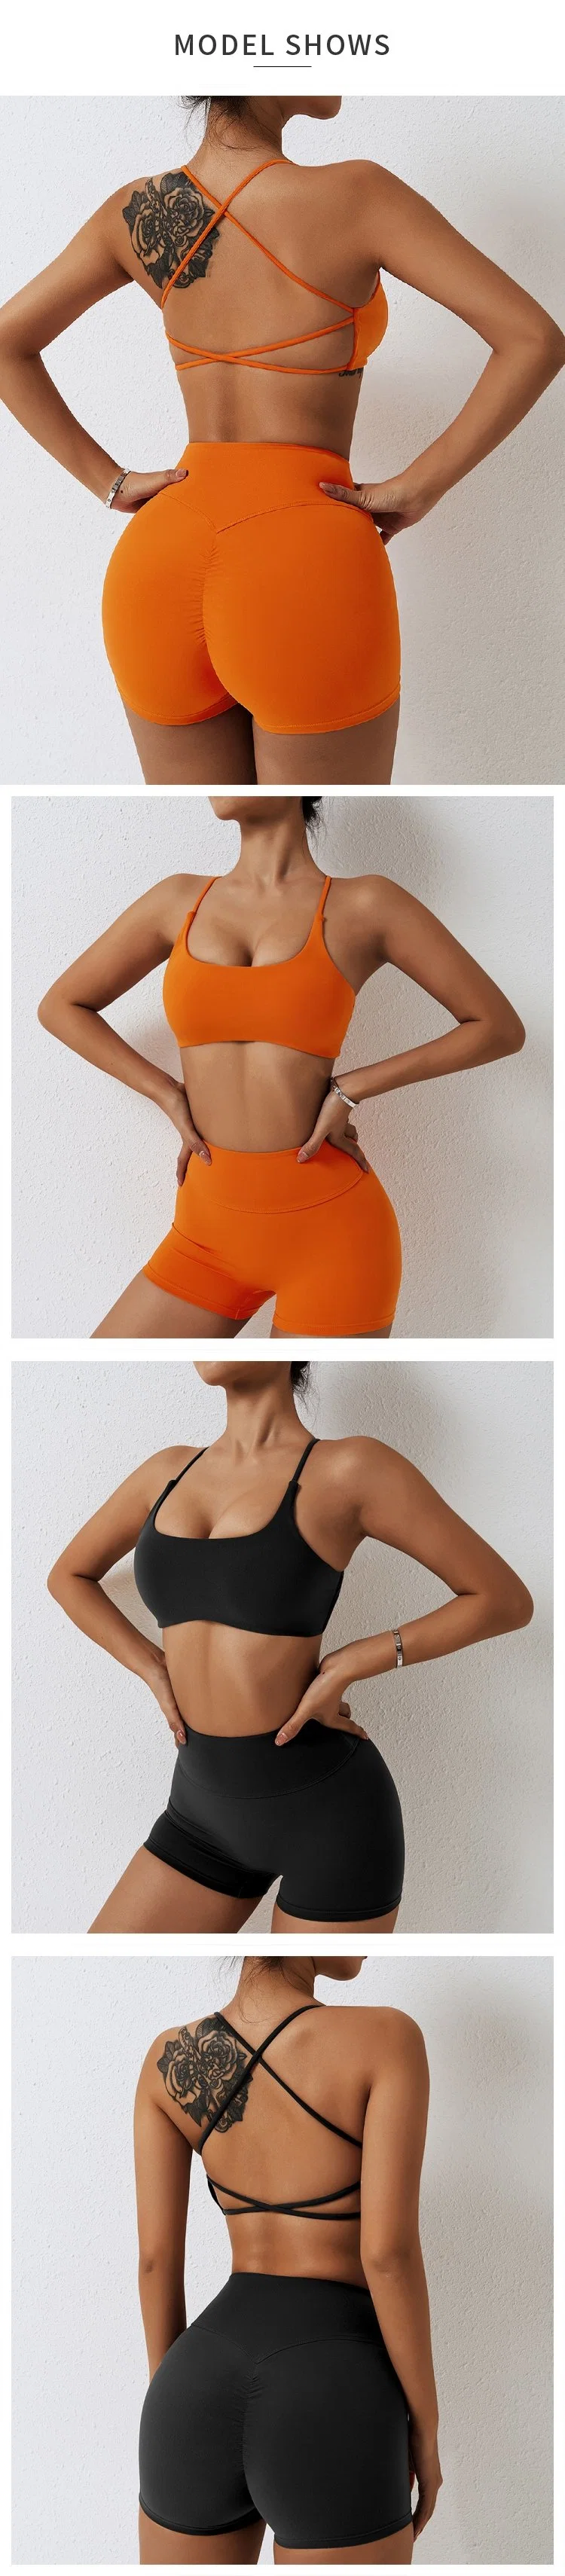 Superior New Fashion Spring Fitness Workout Activewear Running Gym Quick-Drying 2 Pieces Cross-Back Bra Seamless Shorts Leggings Sports Yoga Suit for Women